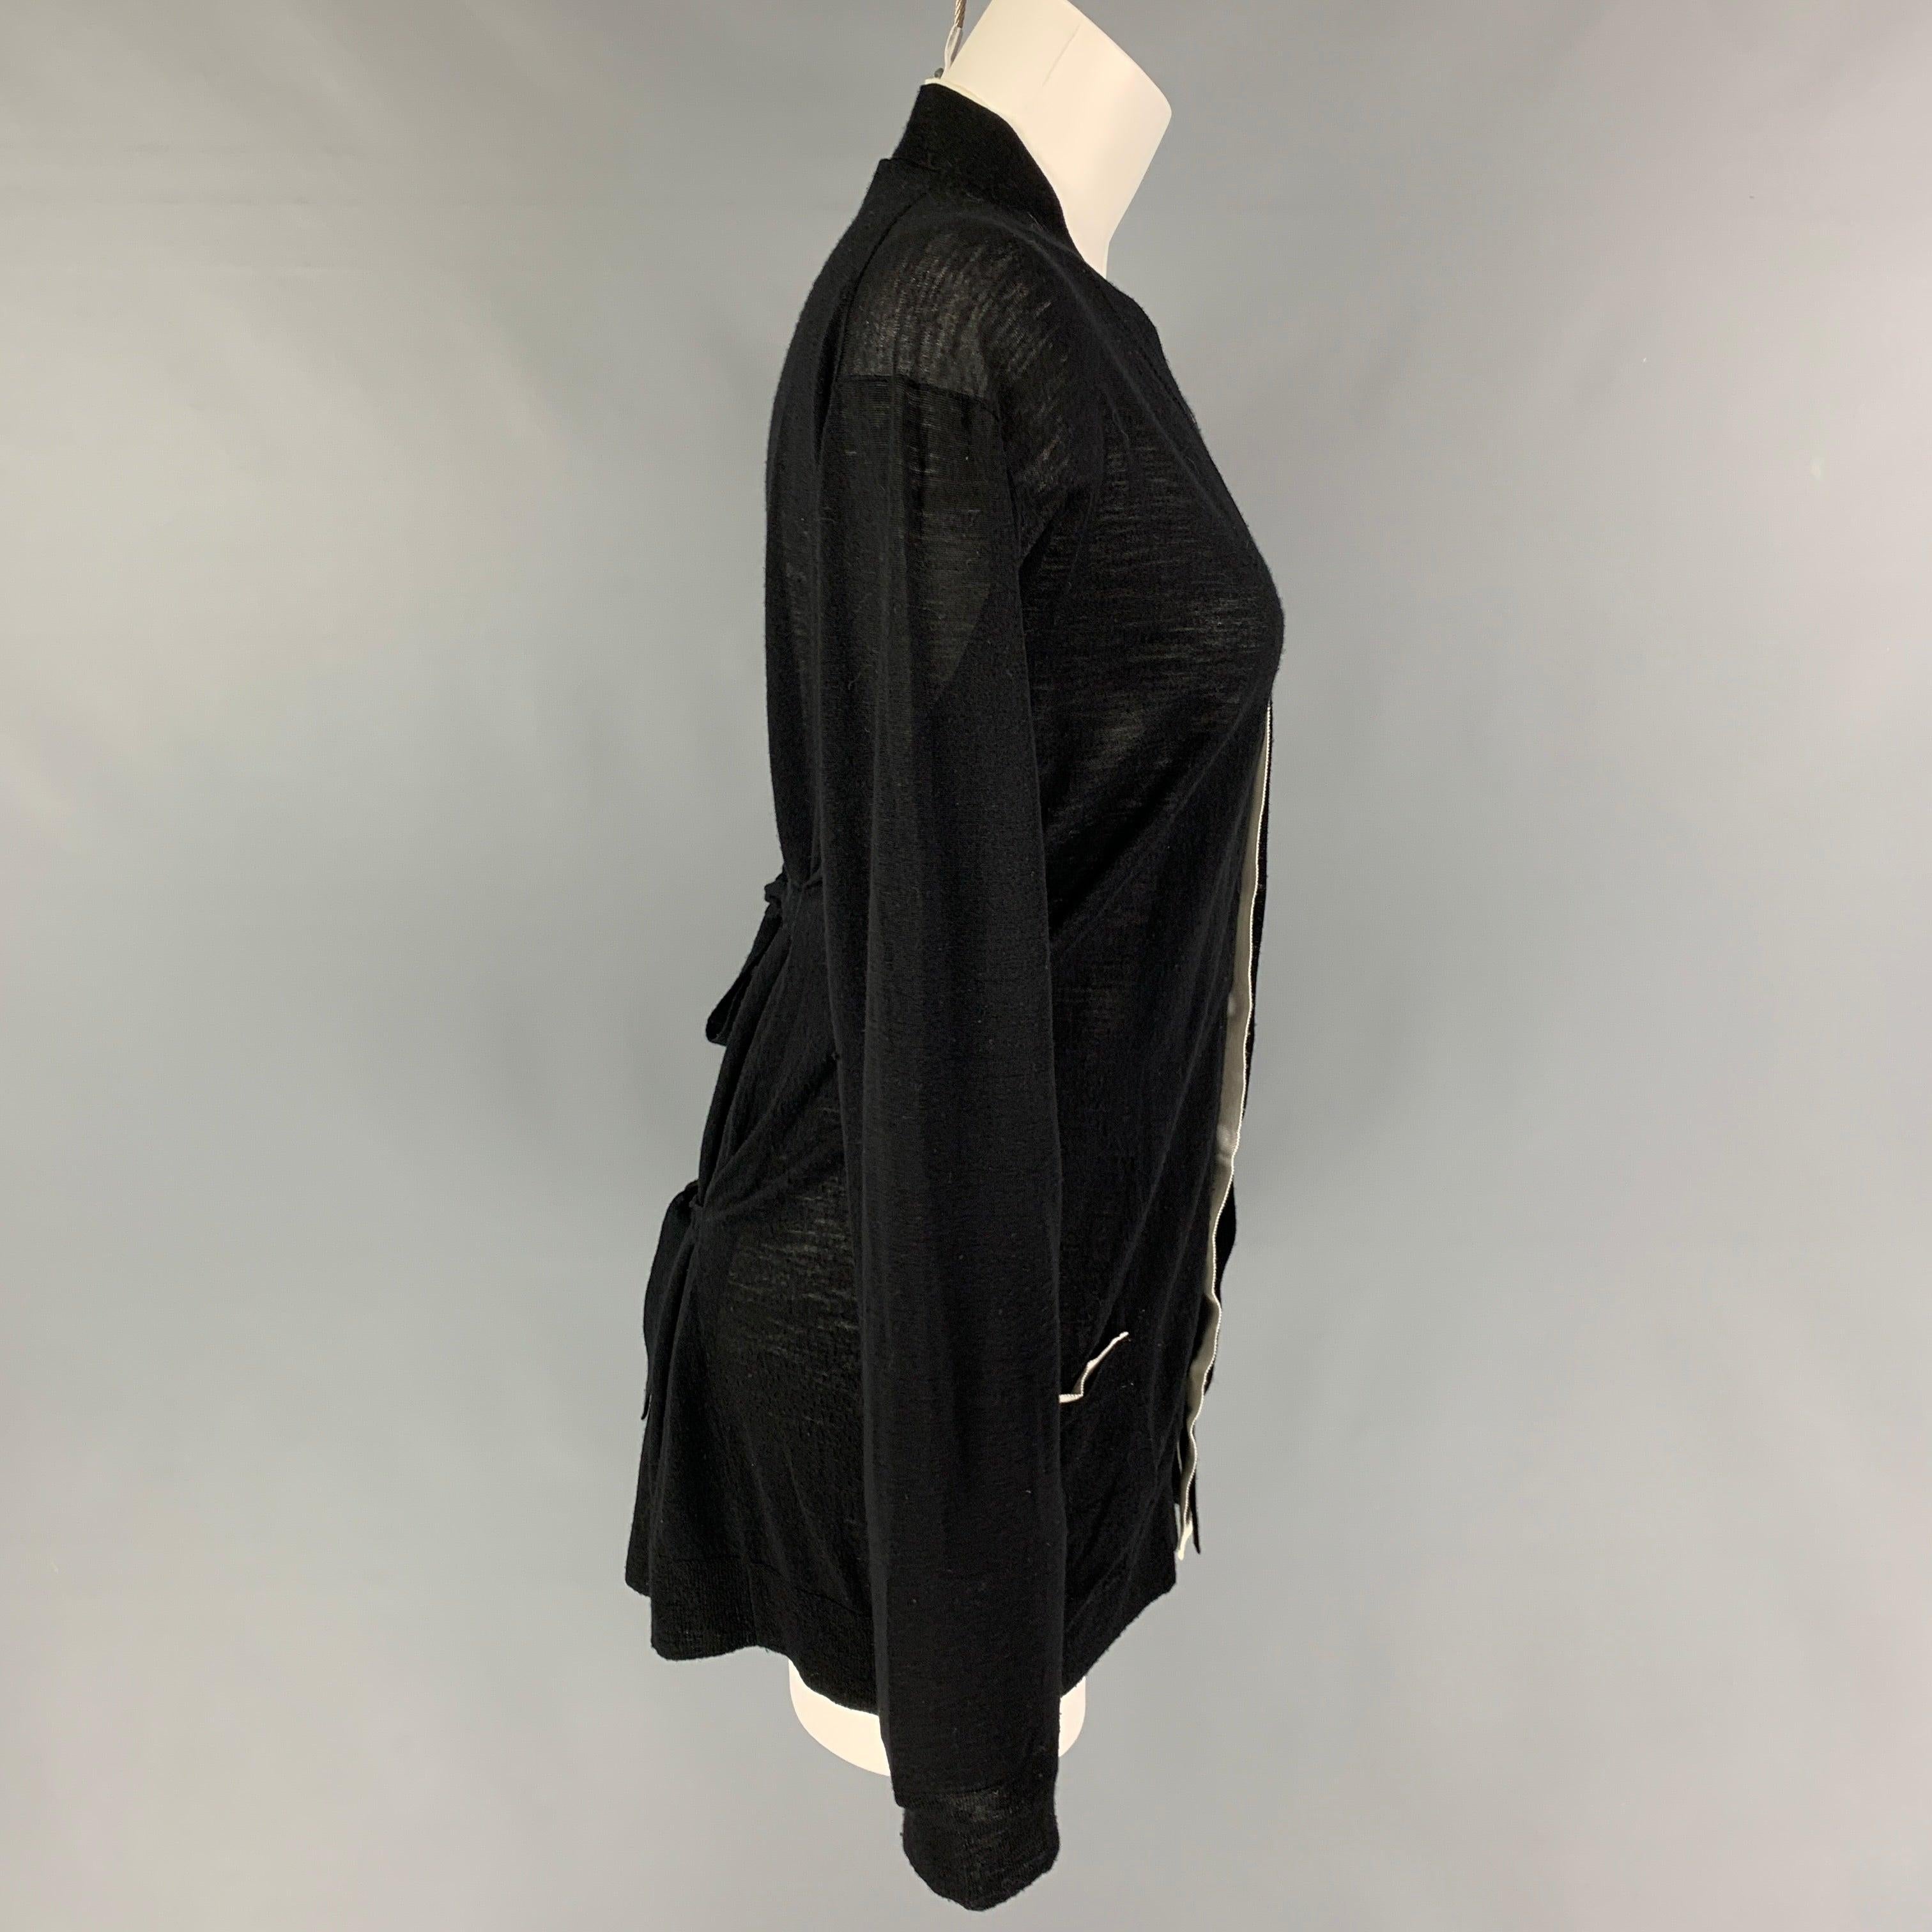 ANN DEMEULEMEESTER cardigan comes in a black wool with a white contrast trim featuring back self-toe details, front pockets, back slit, and a buttoned closure. Made in Belgium.
Very Good
Pre-Owned Condition. 

Marked:   40 

Measurements: 
